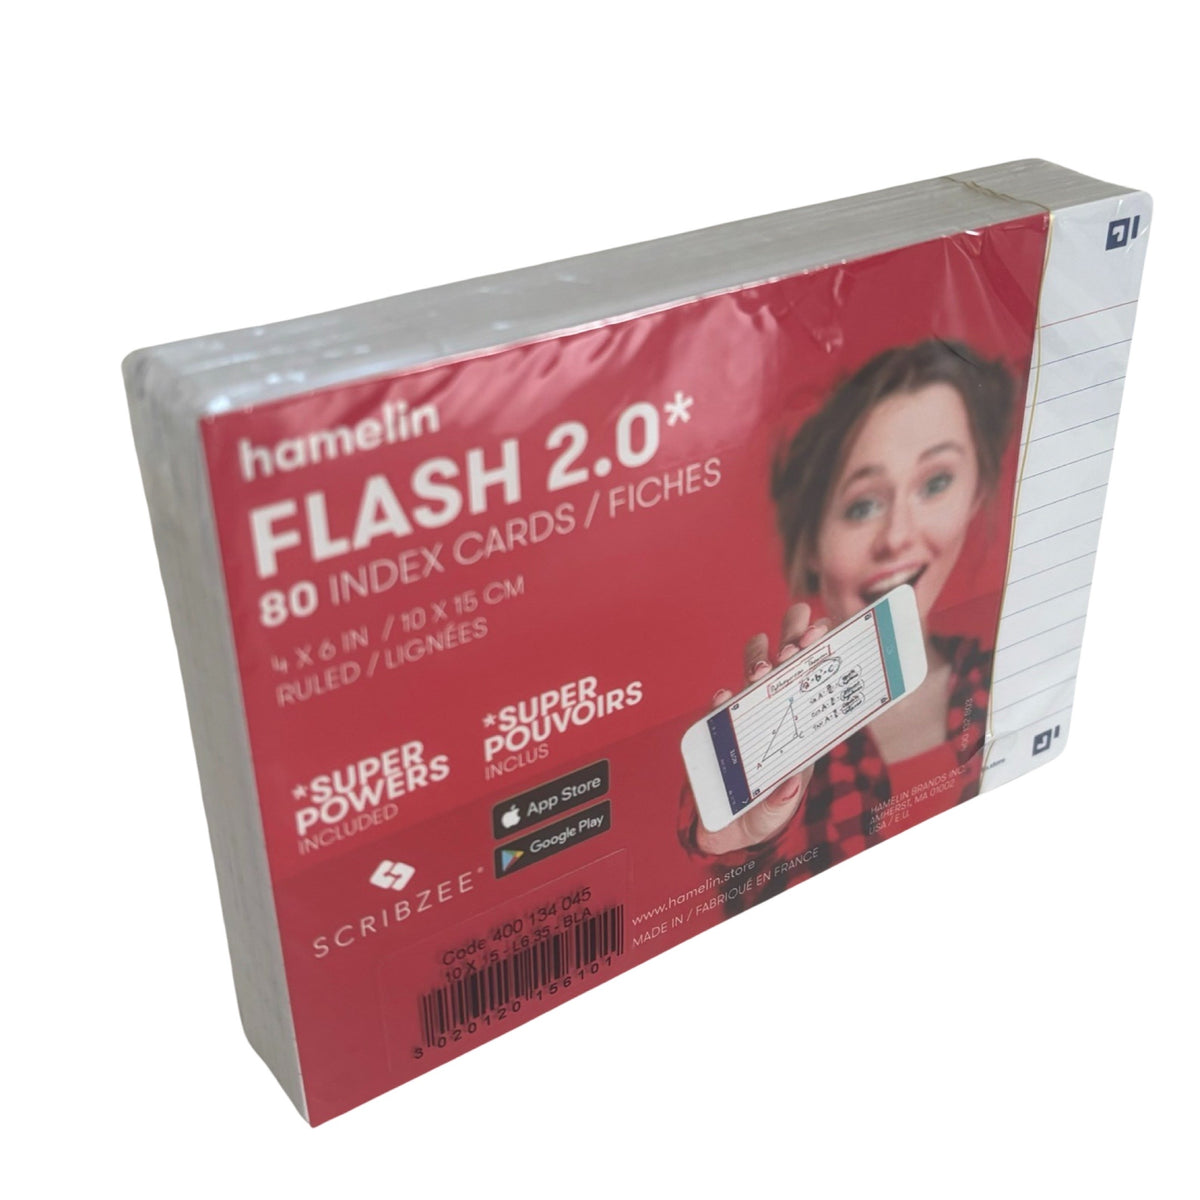 80ct Hamelin White Flash 4 x 6 Flashcards/Index Cards - Super Power's Included